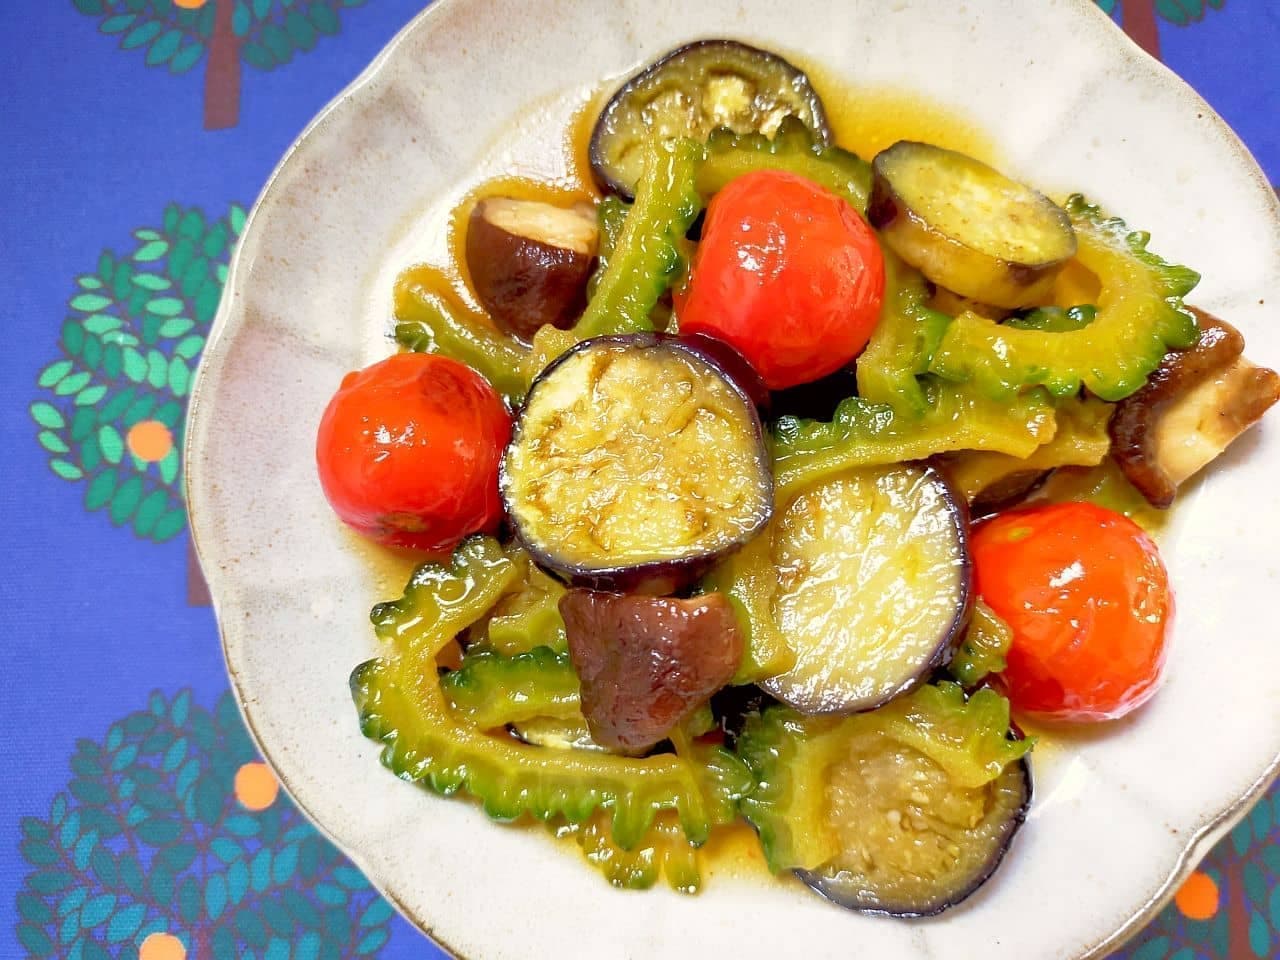 Recipe for "Grilled Eggplant and Summer Vegetables